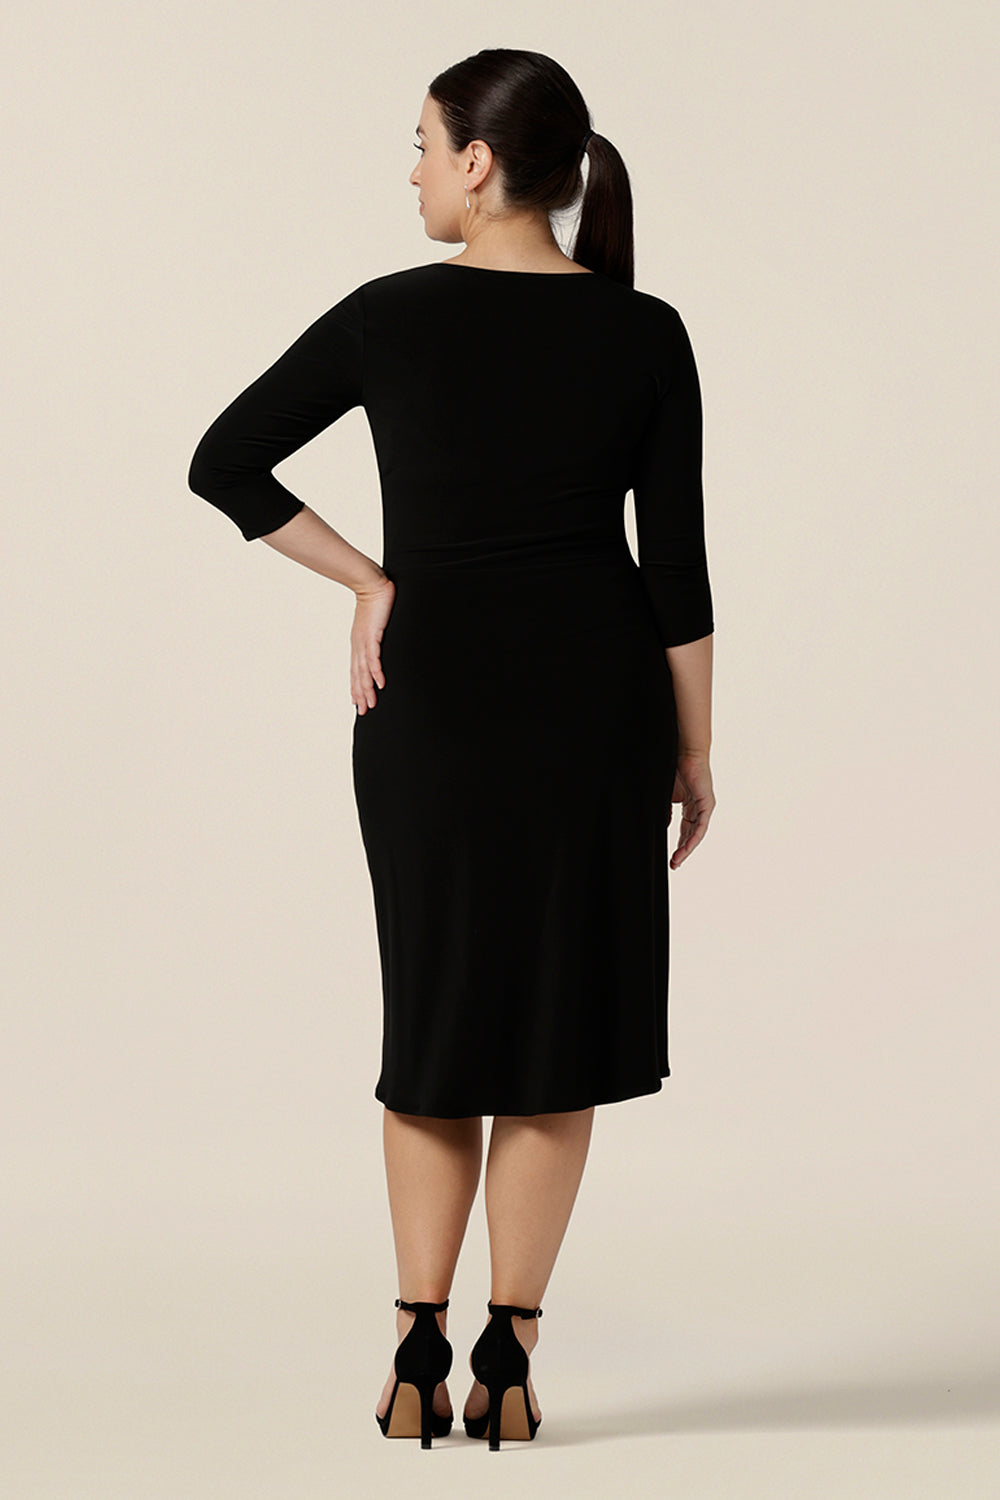 Back view of a classic black dress for evening and occasion wear, this is a fixed wrap, black jersey dress with 3/4 sleeves. Worn by a size 10 woman, shop this made-in-Australia dress is by Australian and New Zealand women's clothes label, Leina & Fleur and is available to shop in dress sizes 8 to 24.